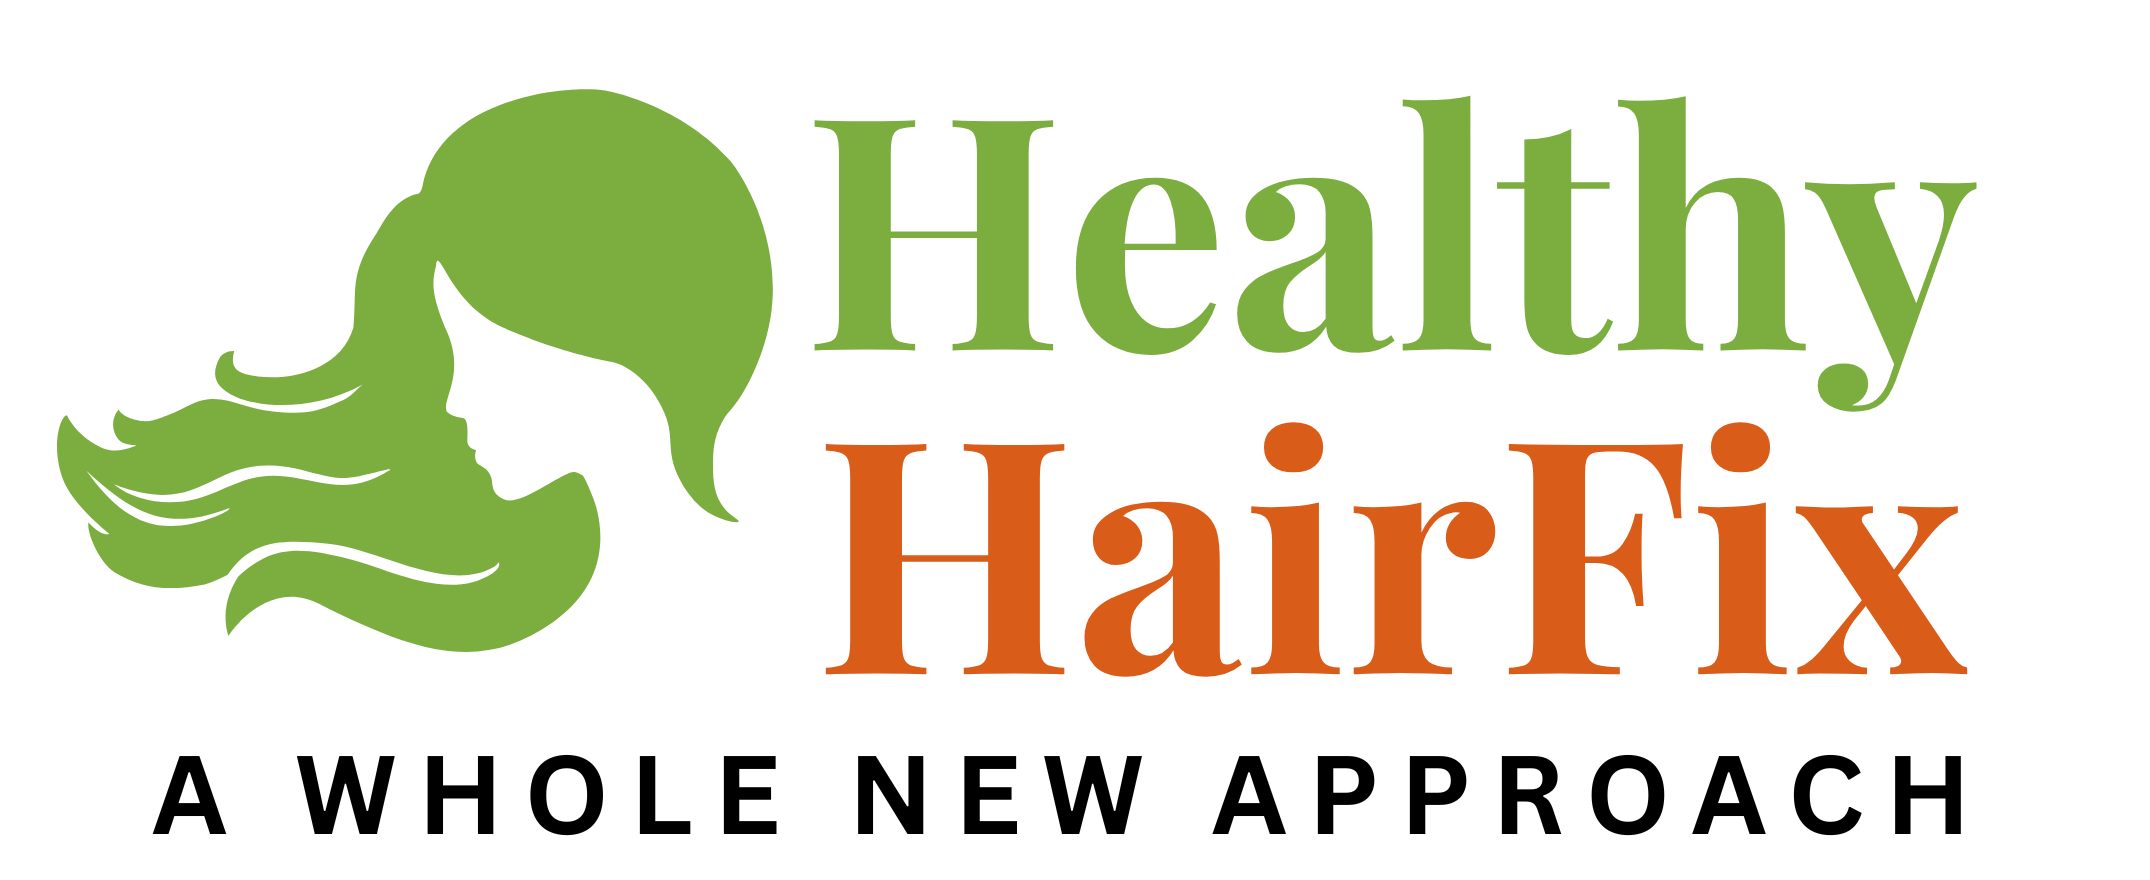 A whole new approach to hair loss, the healthy hair fix by women's hair loss expert Julie Olson